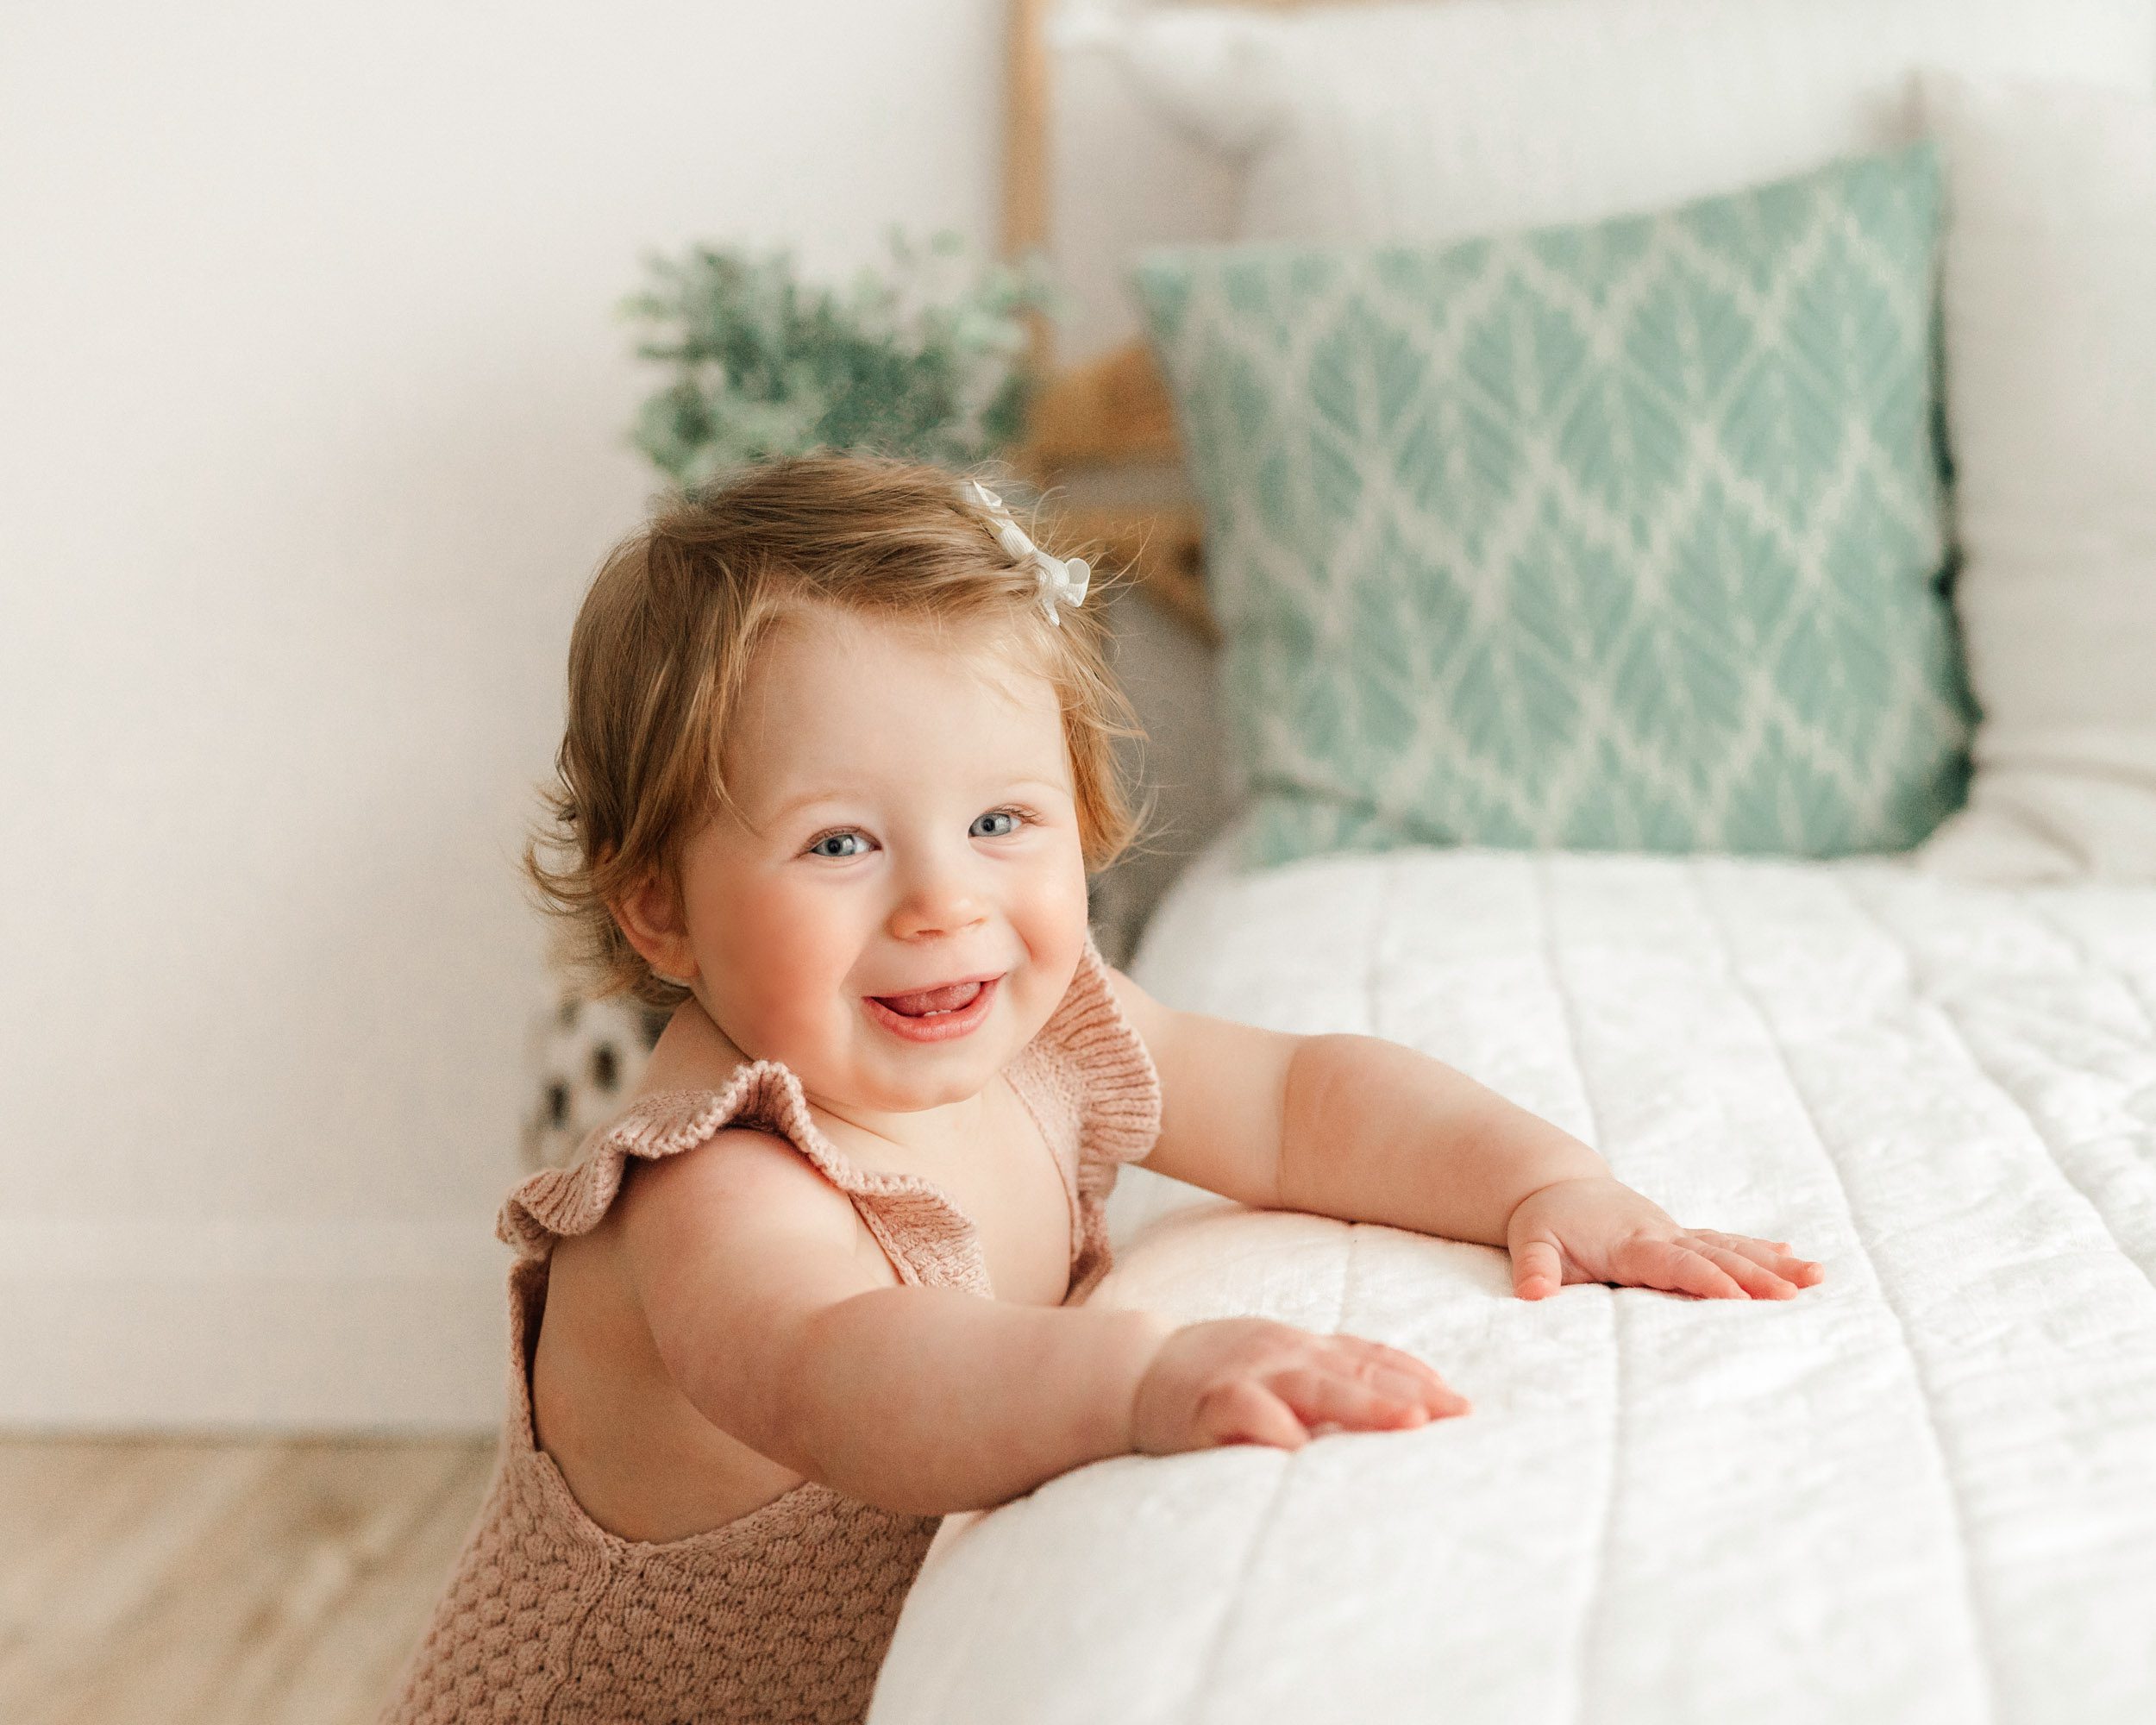 a baby girl standing and holding onto the edge of a bed as she looks at the camera with a huge smile on her face during a baby milestone photoshoot